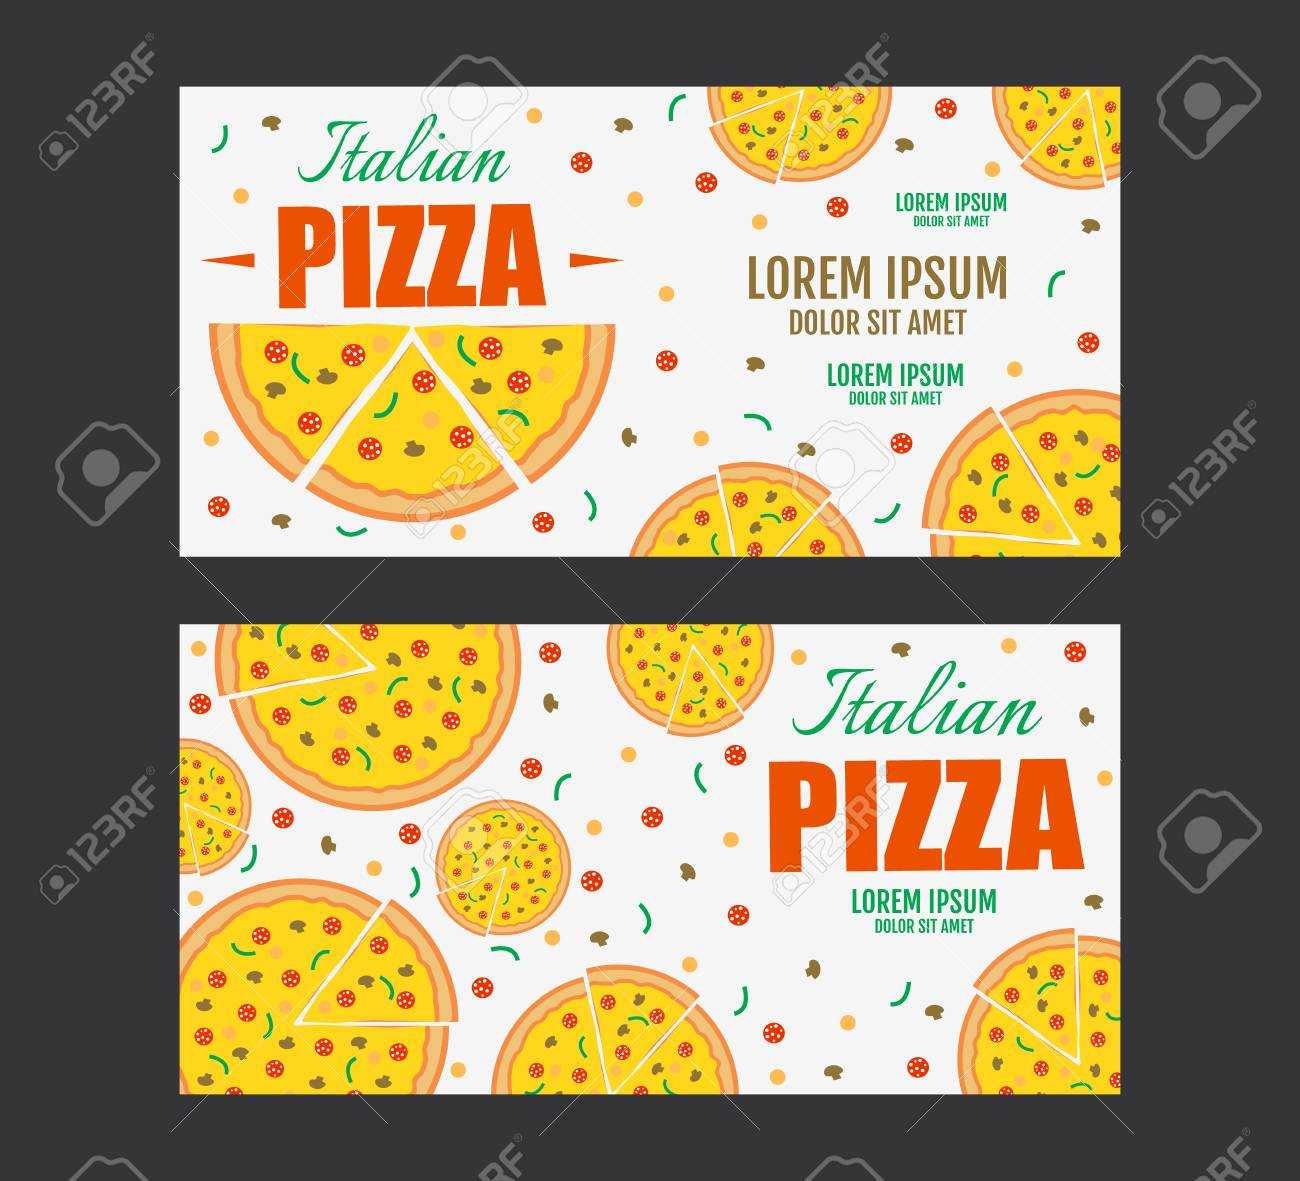 Pizza Flyer Vector Template. Two Pizza Banners. Gift Voucher Intended For Pizza Gift Certificate Template